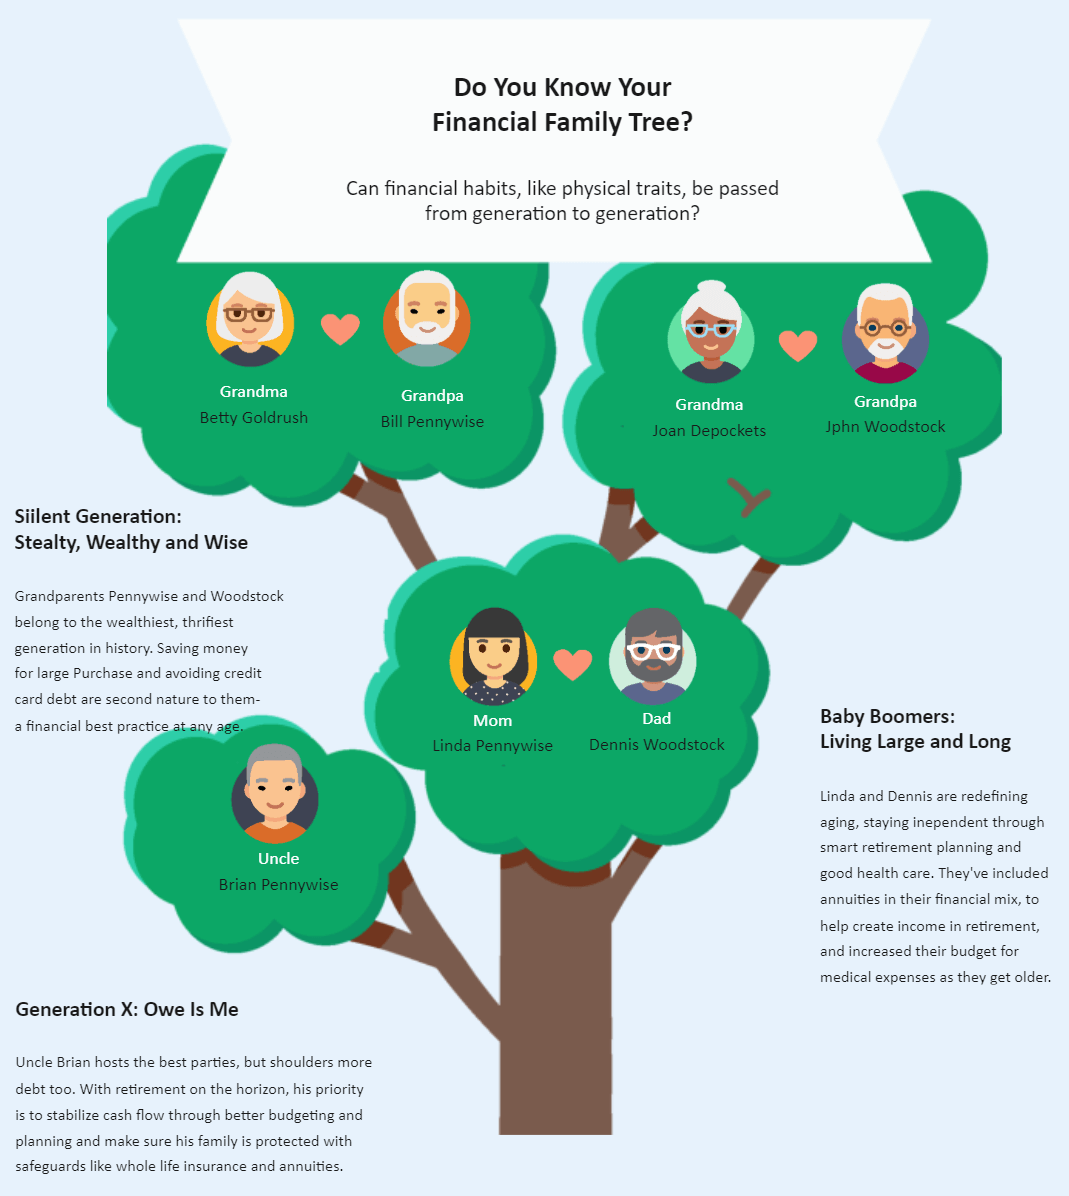 Do You Know Your Family Tree